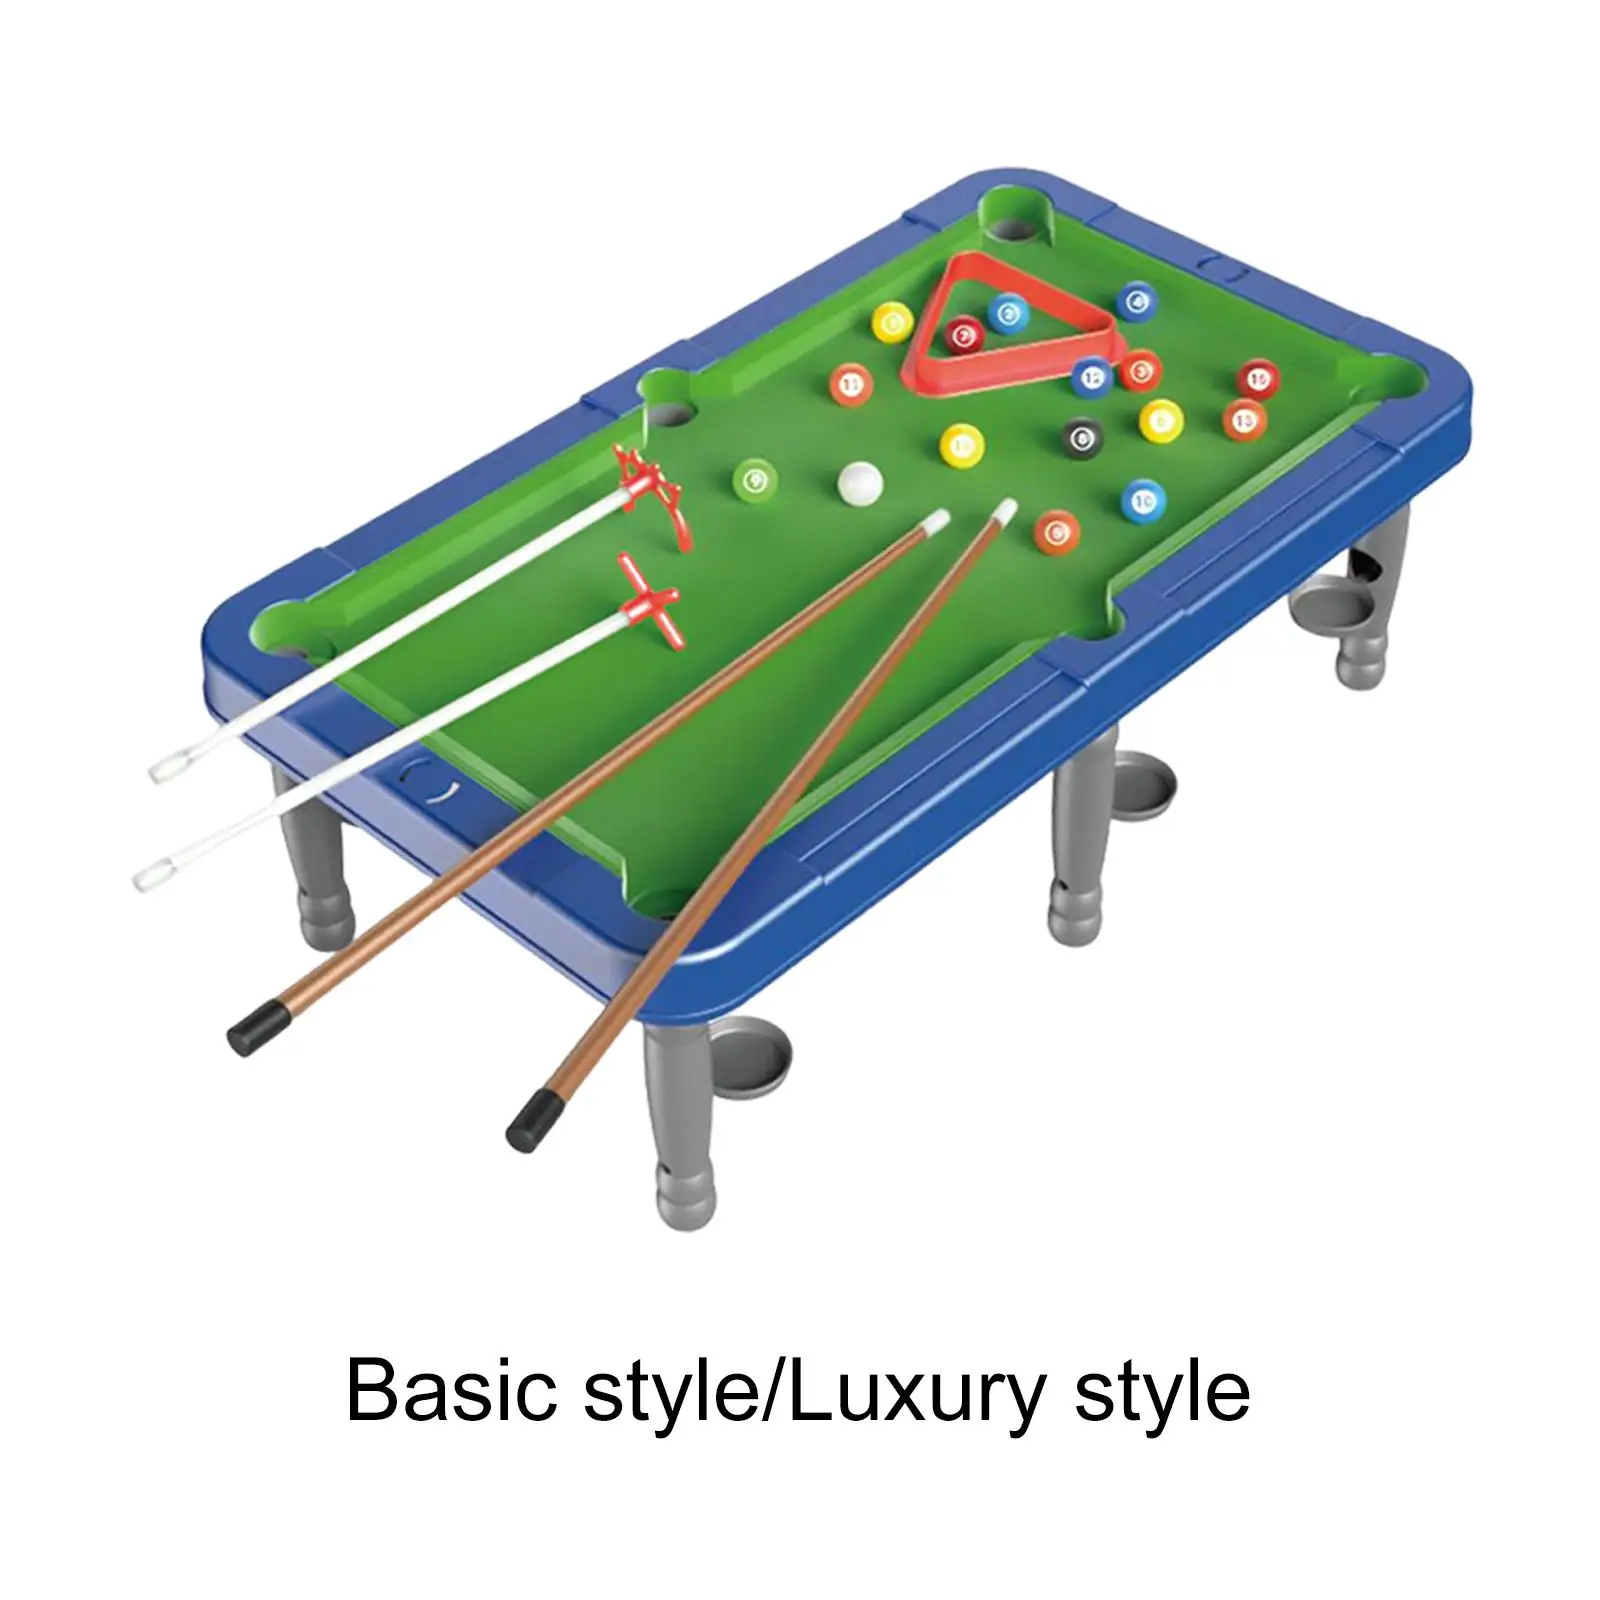 Portable Tabletop Billiards Game Office Use Leisure Chalk, Racking Triangle Game Toy Tabletop Billiards for Children Family Kids